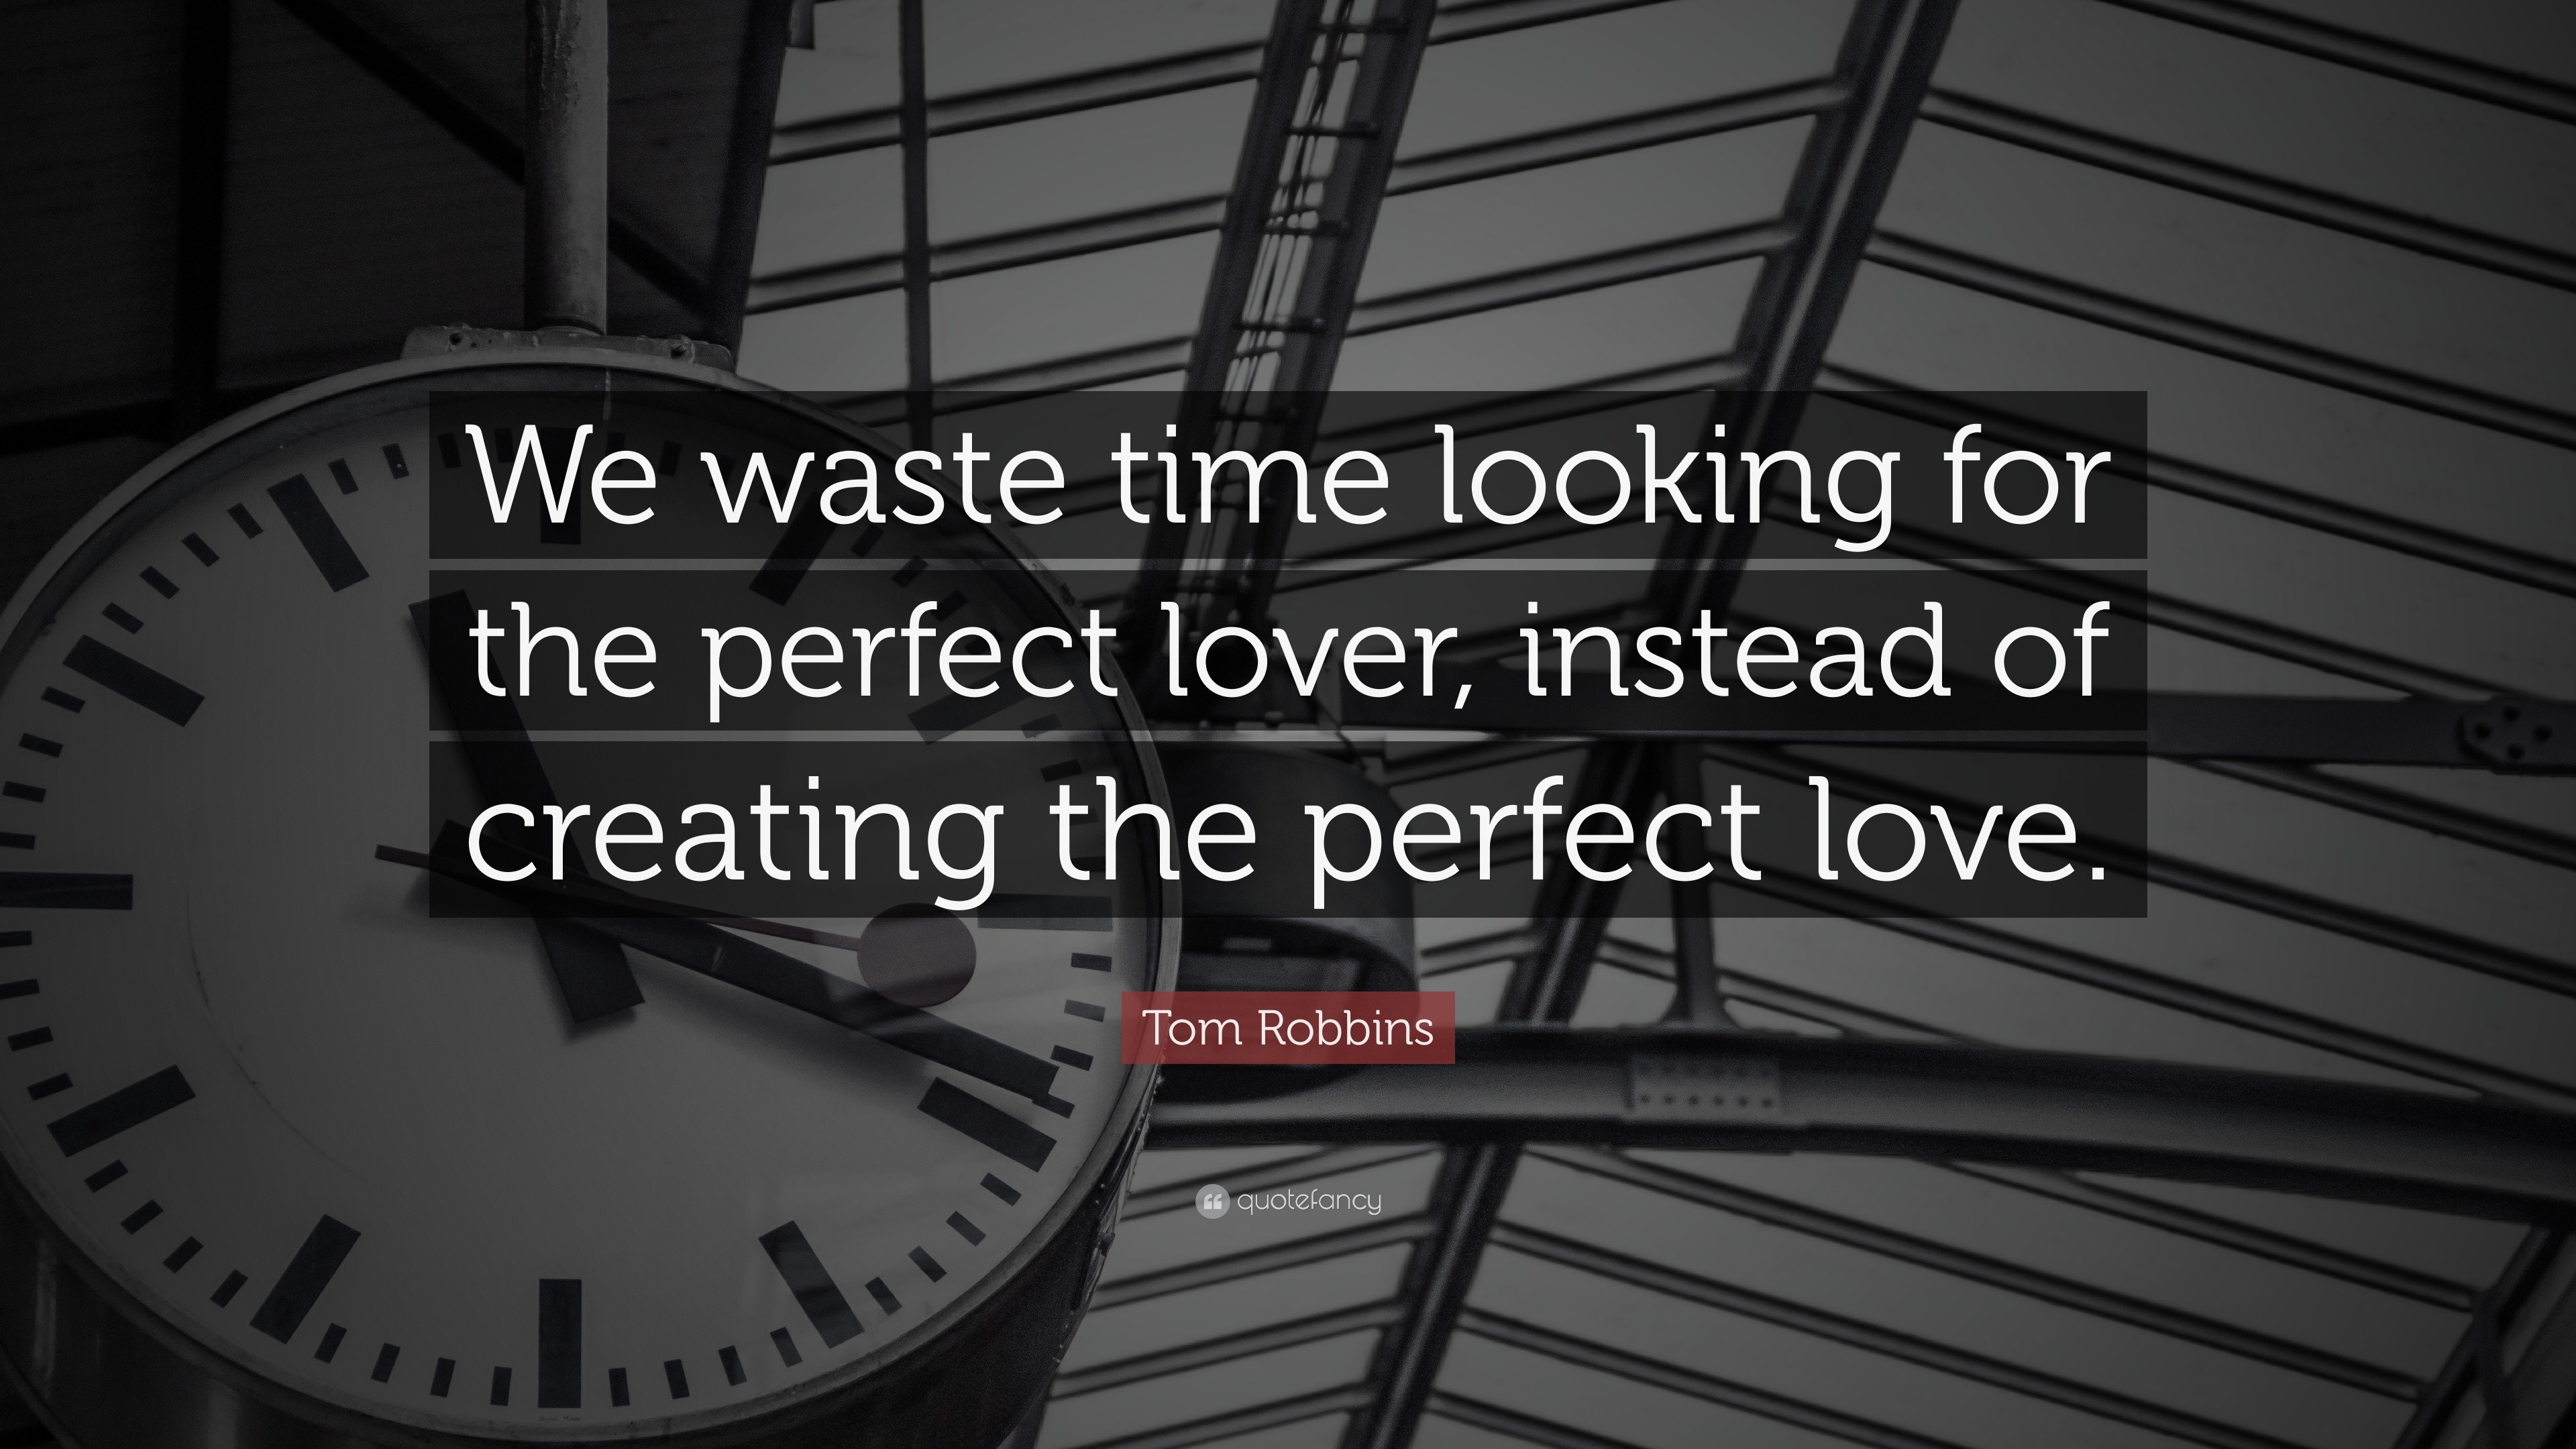 Philosophy Quotes “We waste time looking for the perfect lover instead of creating